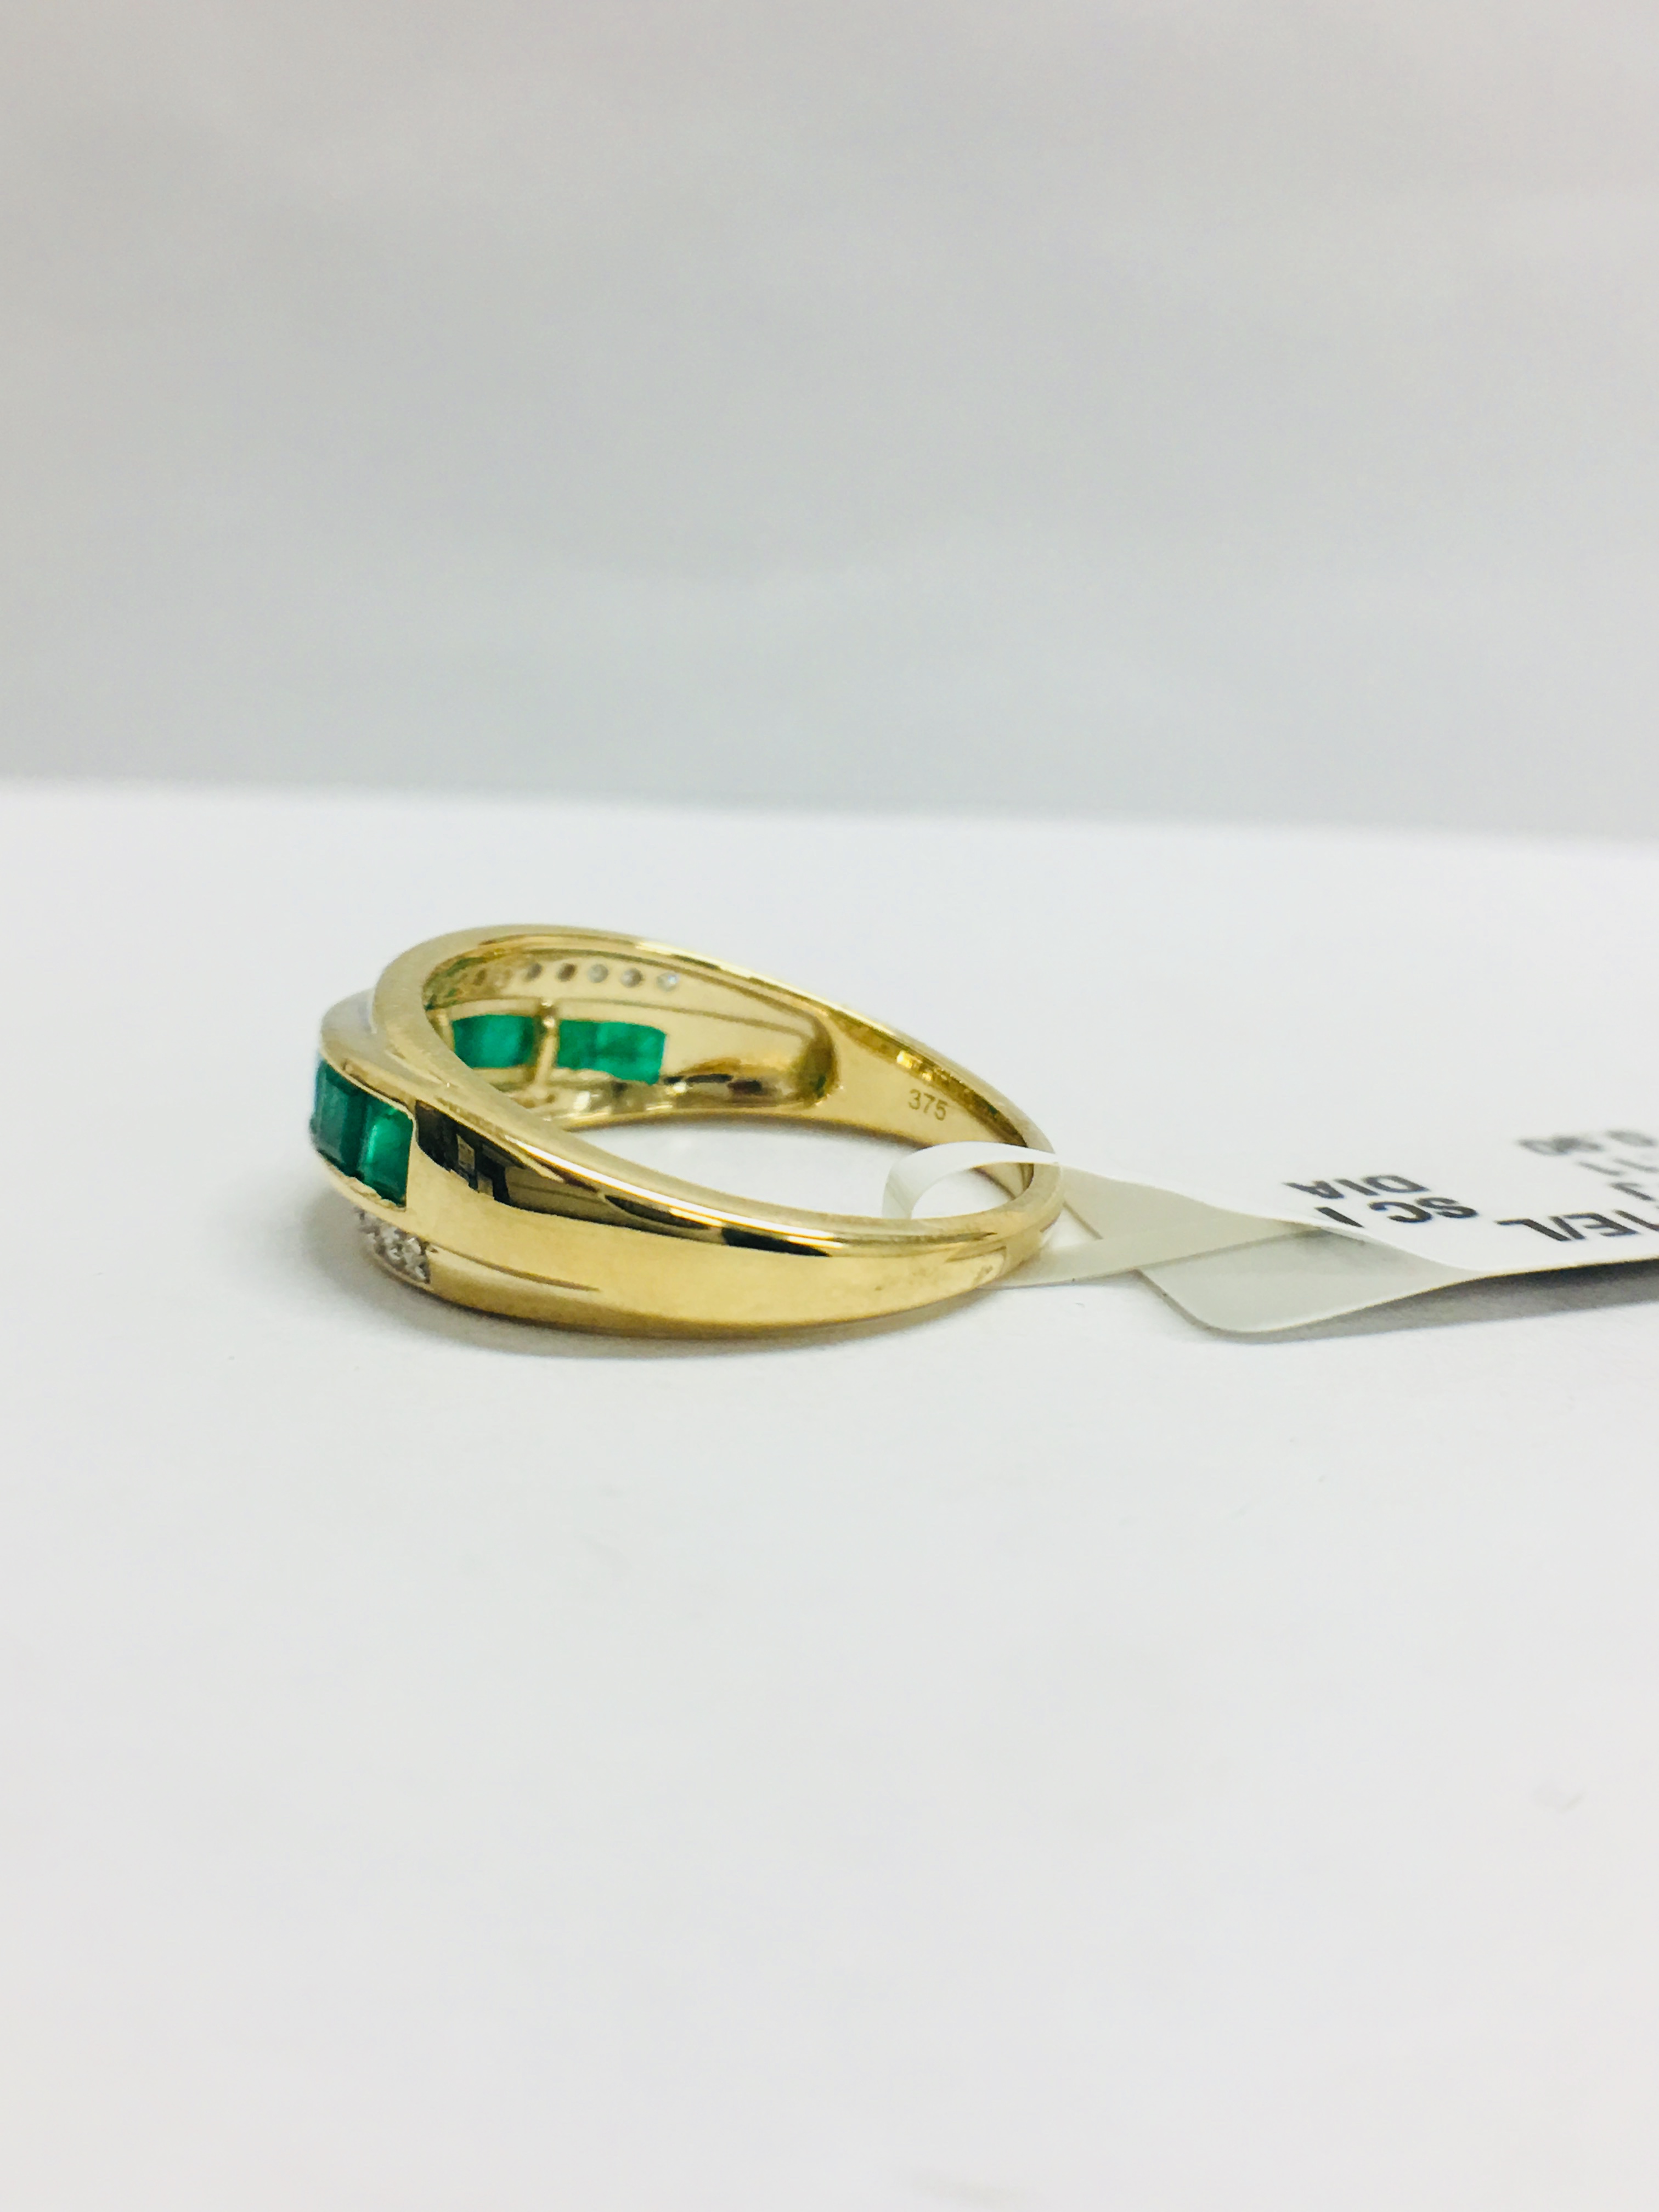 9Ct Yellow Gold Diamond Emerald Crossover Style Ring, - Image 4 of 10